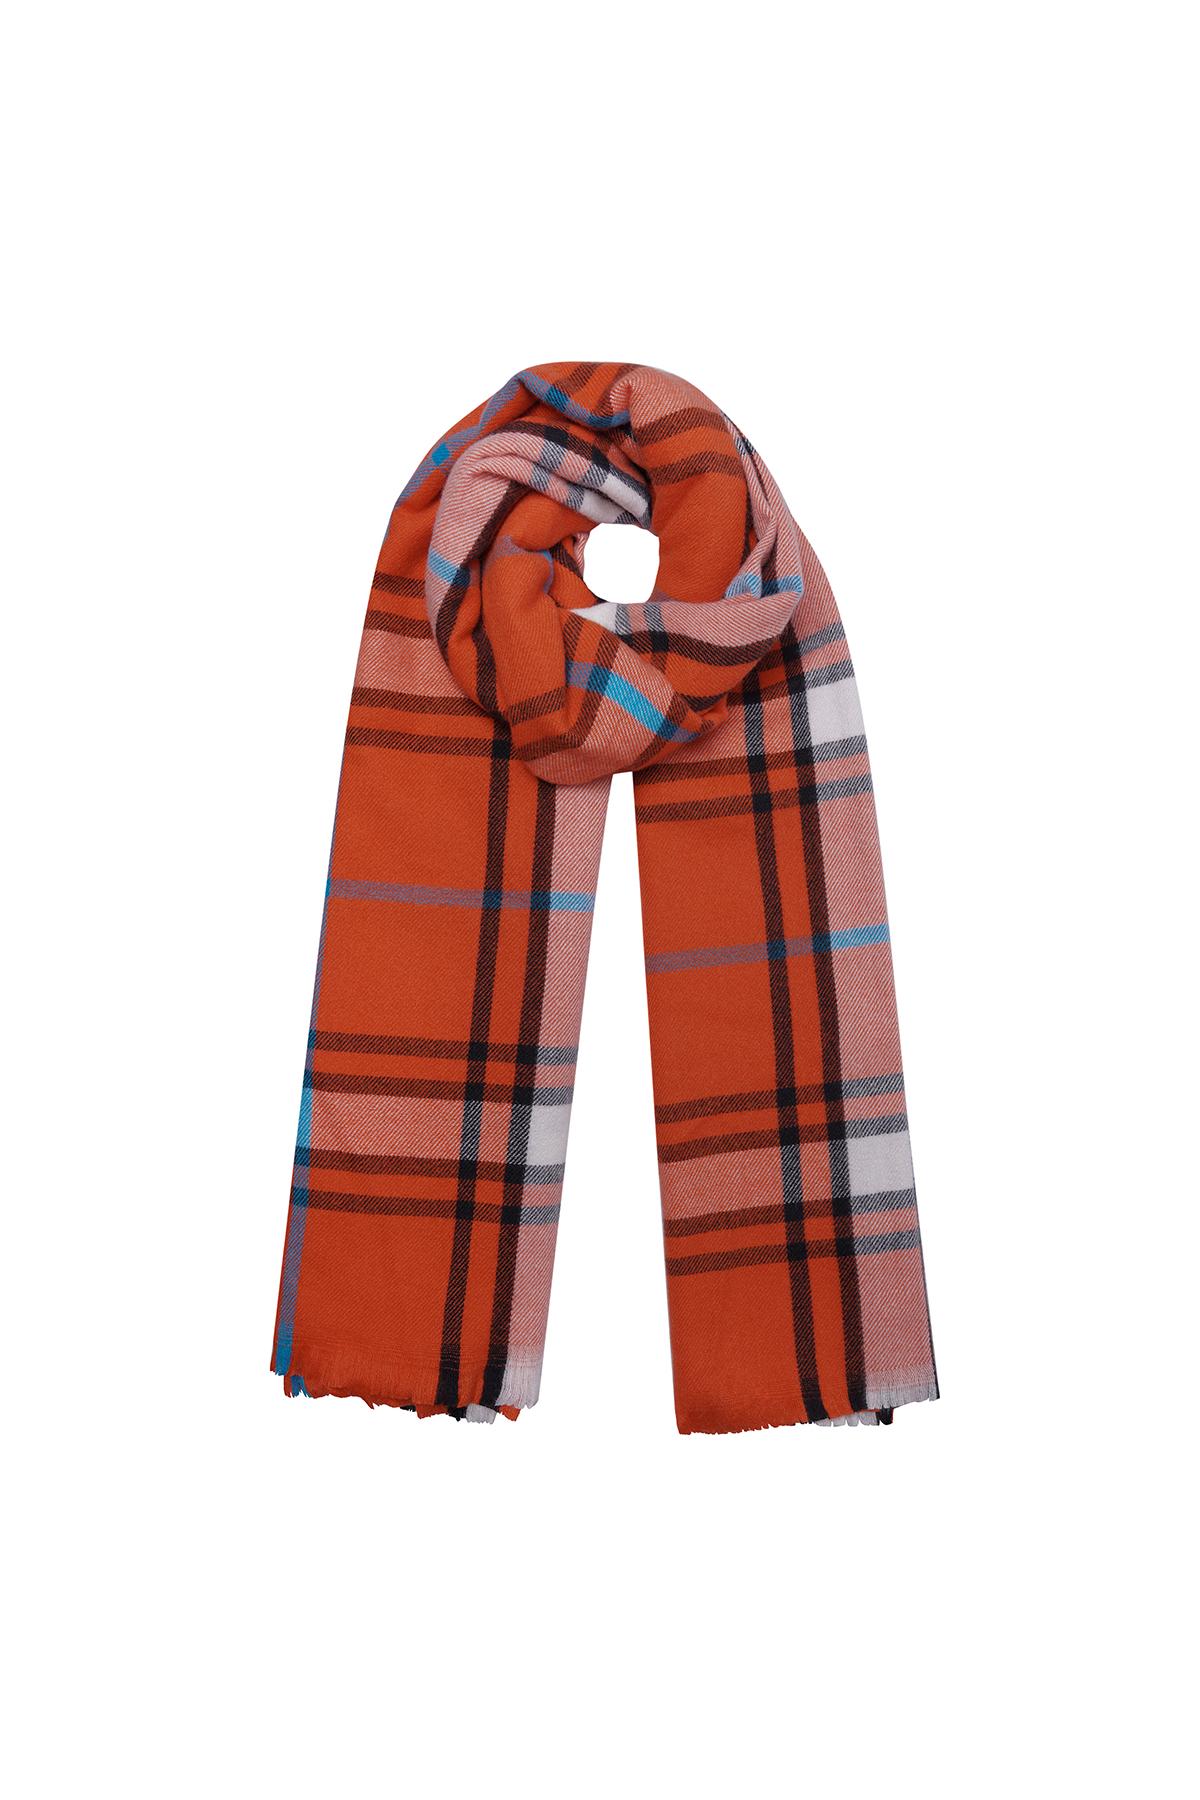 Checkered winter scarf with autumn colors Orange Acrylic